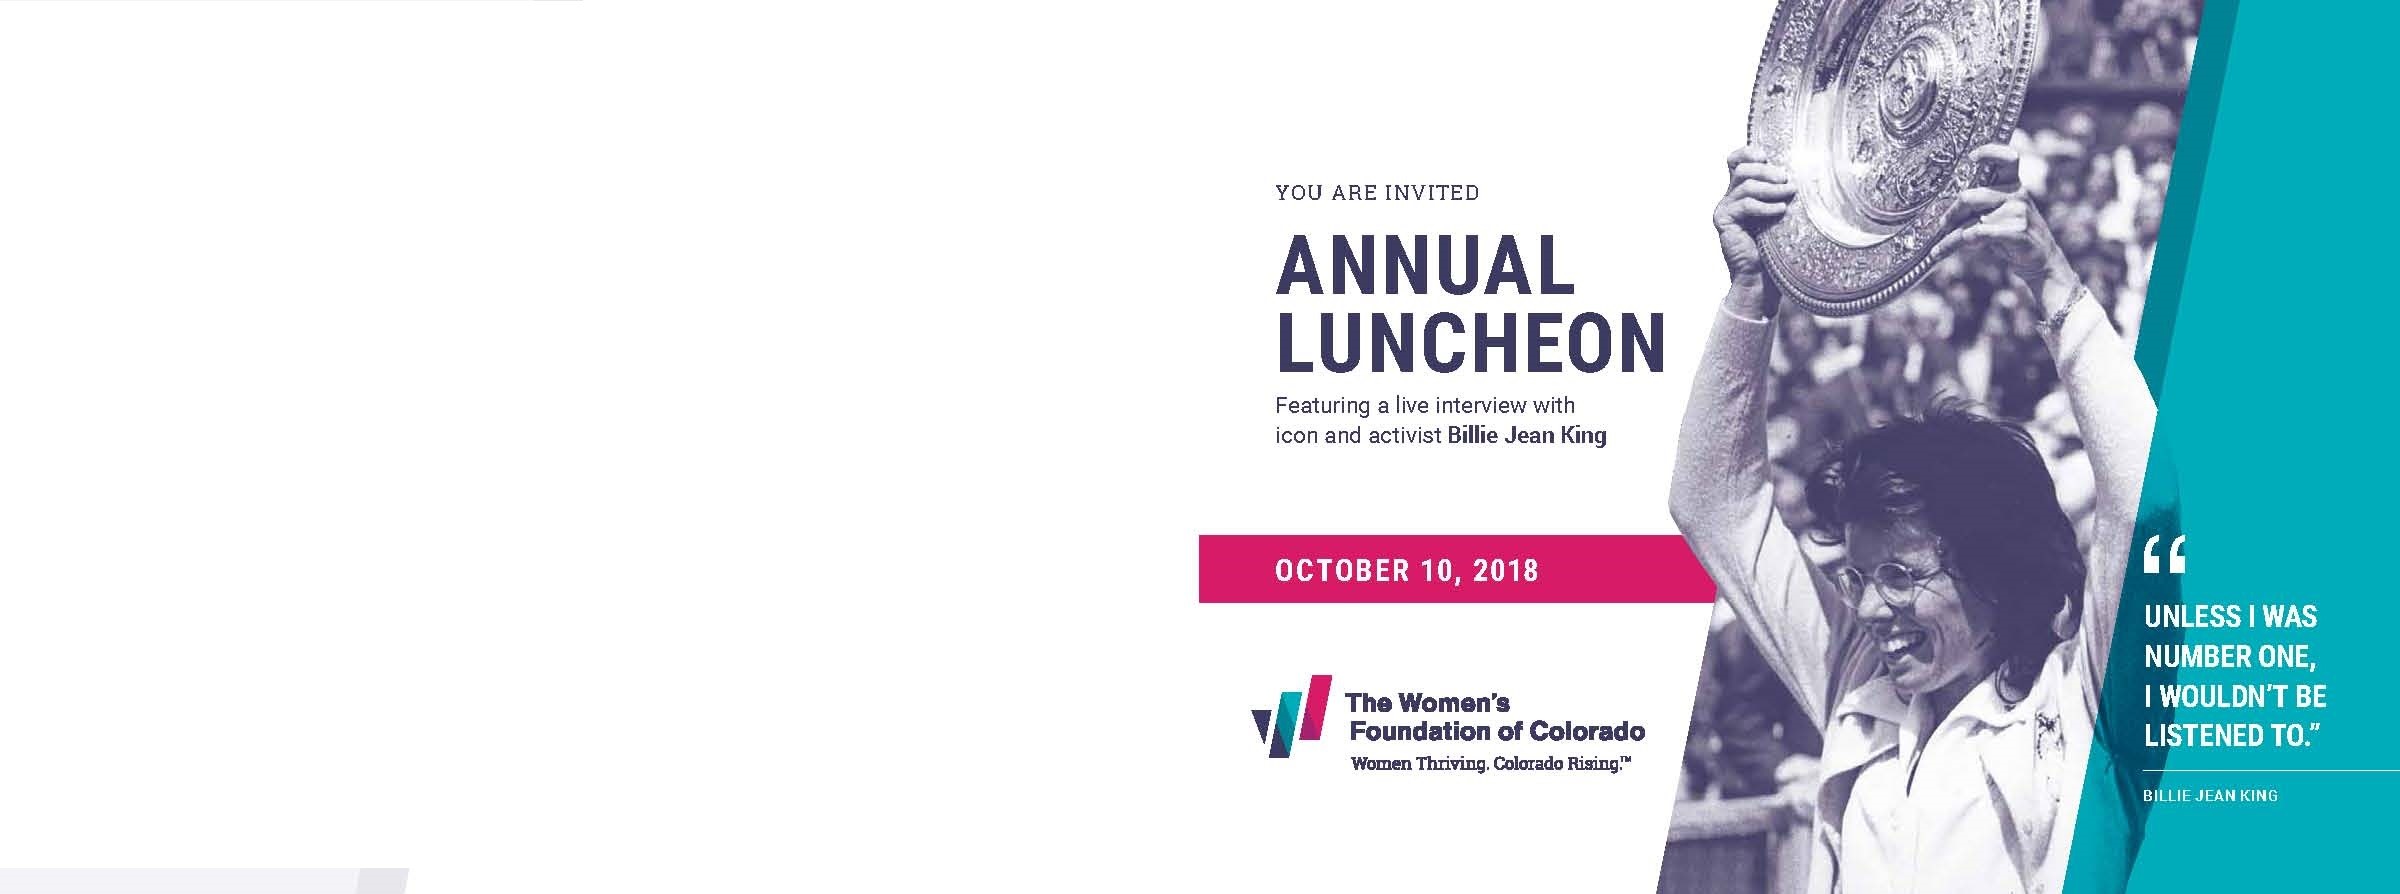 The Women's Foundation of Colorado's Annual Luncheon